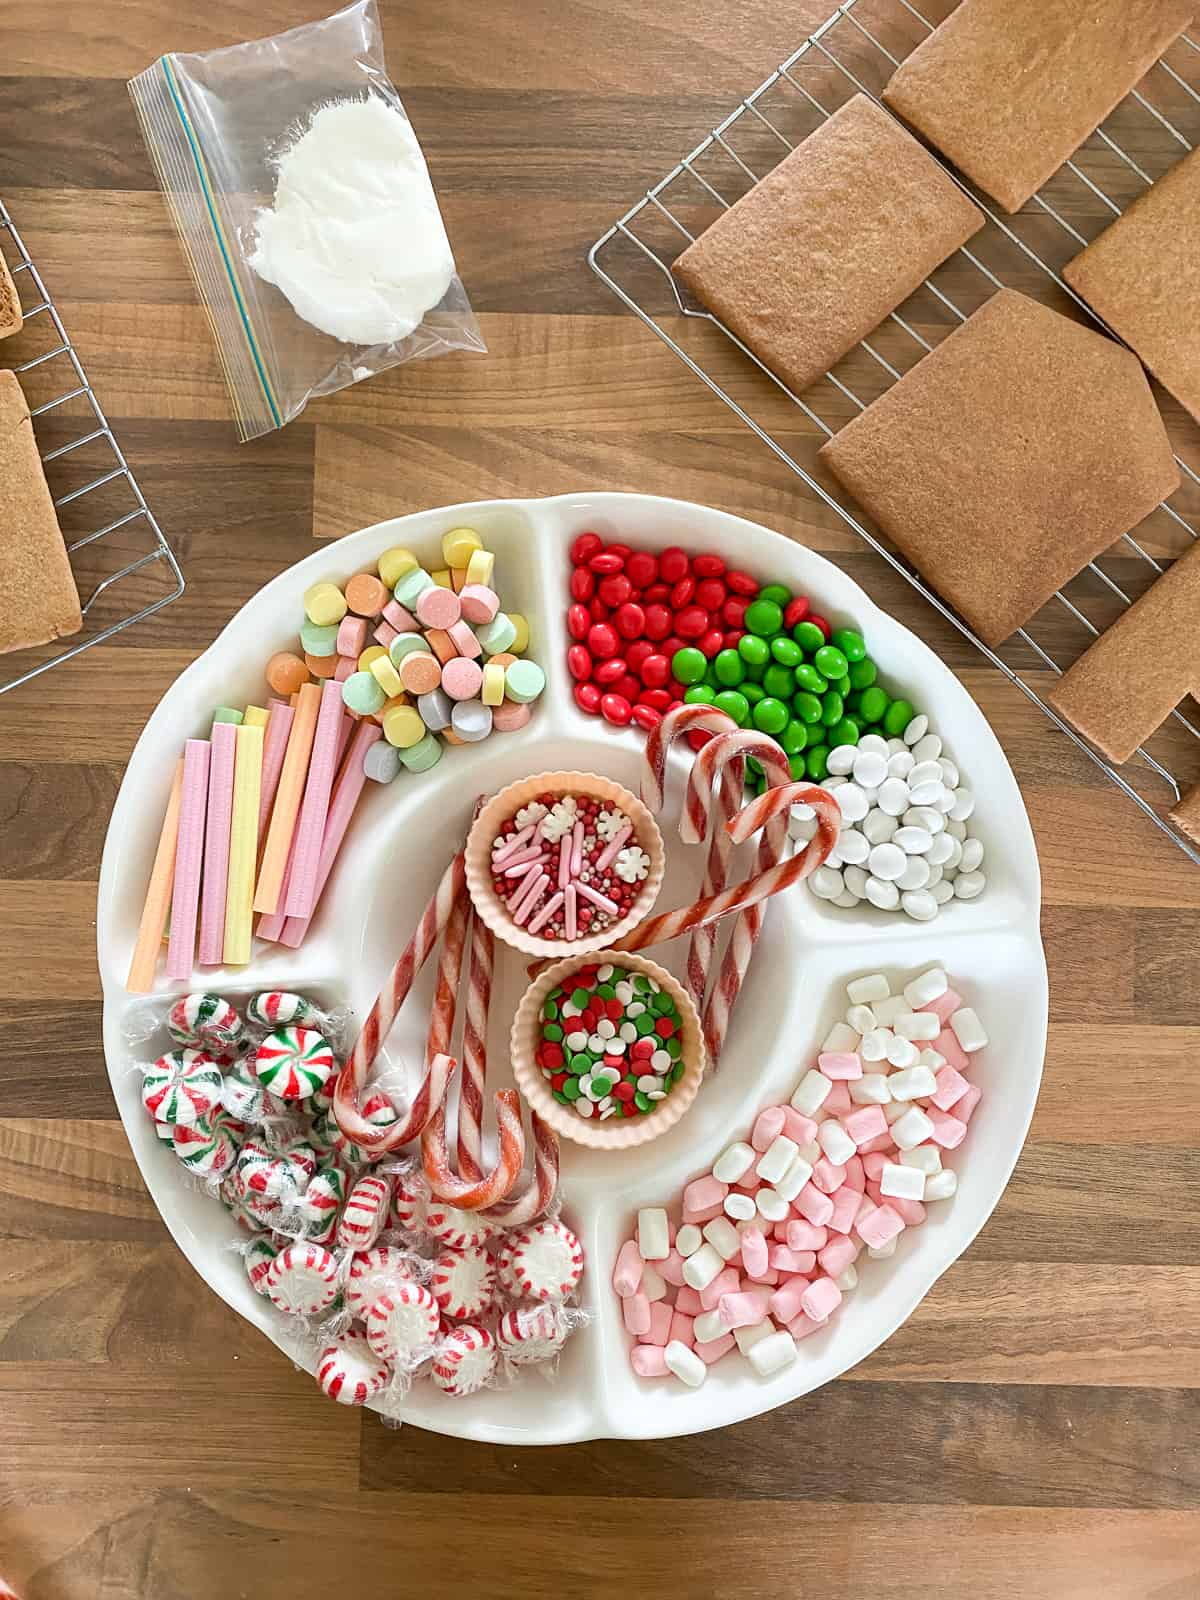 Plate of lollies to decorate gingerbread houses with